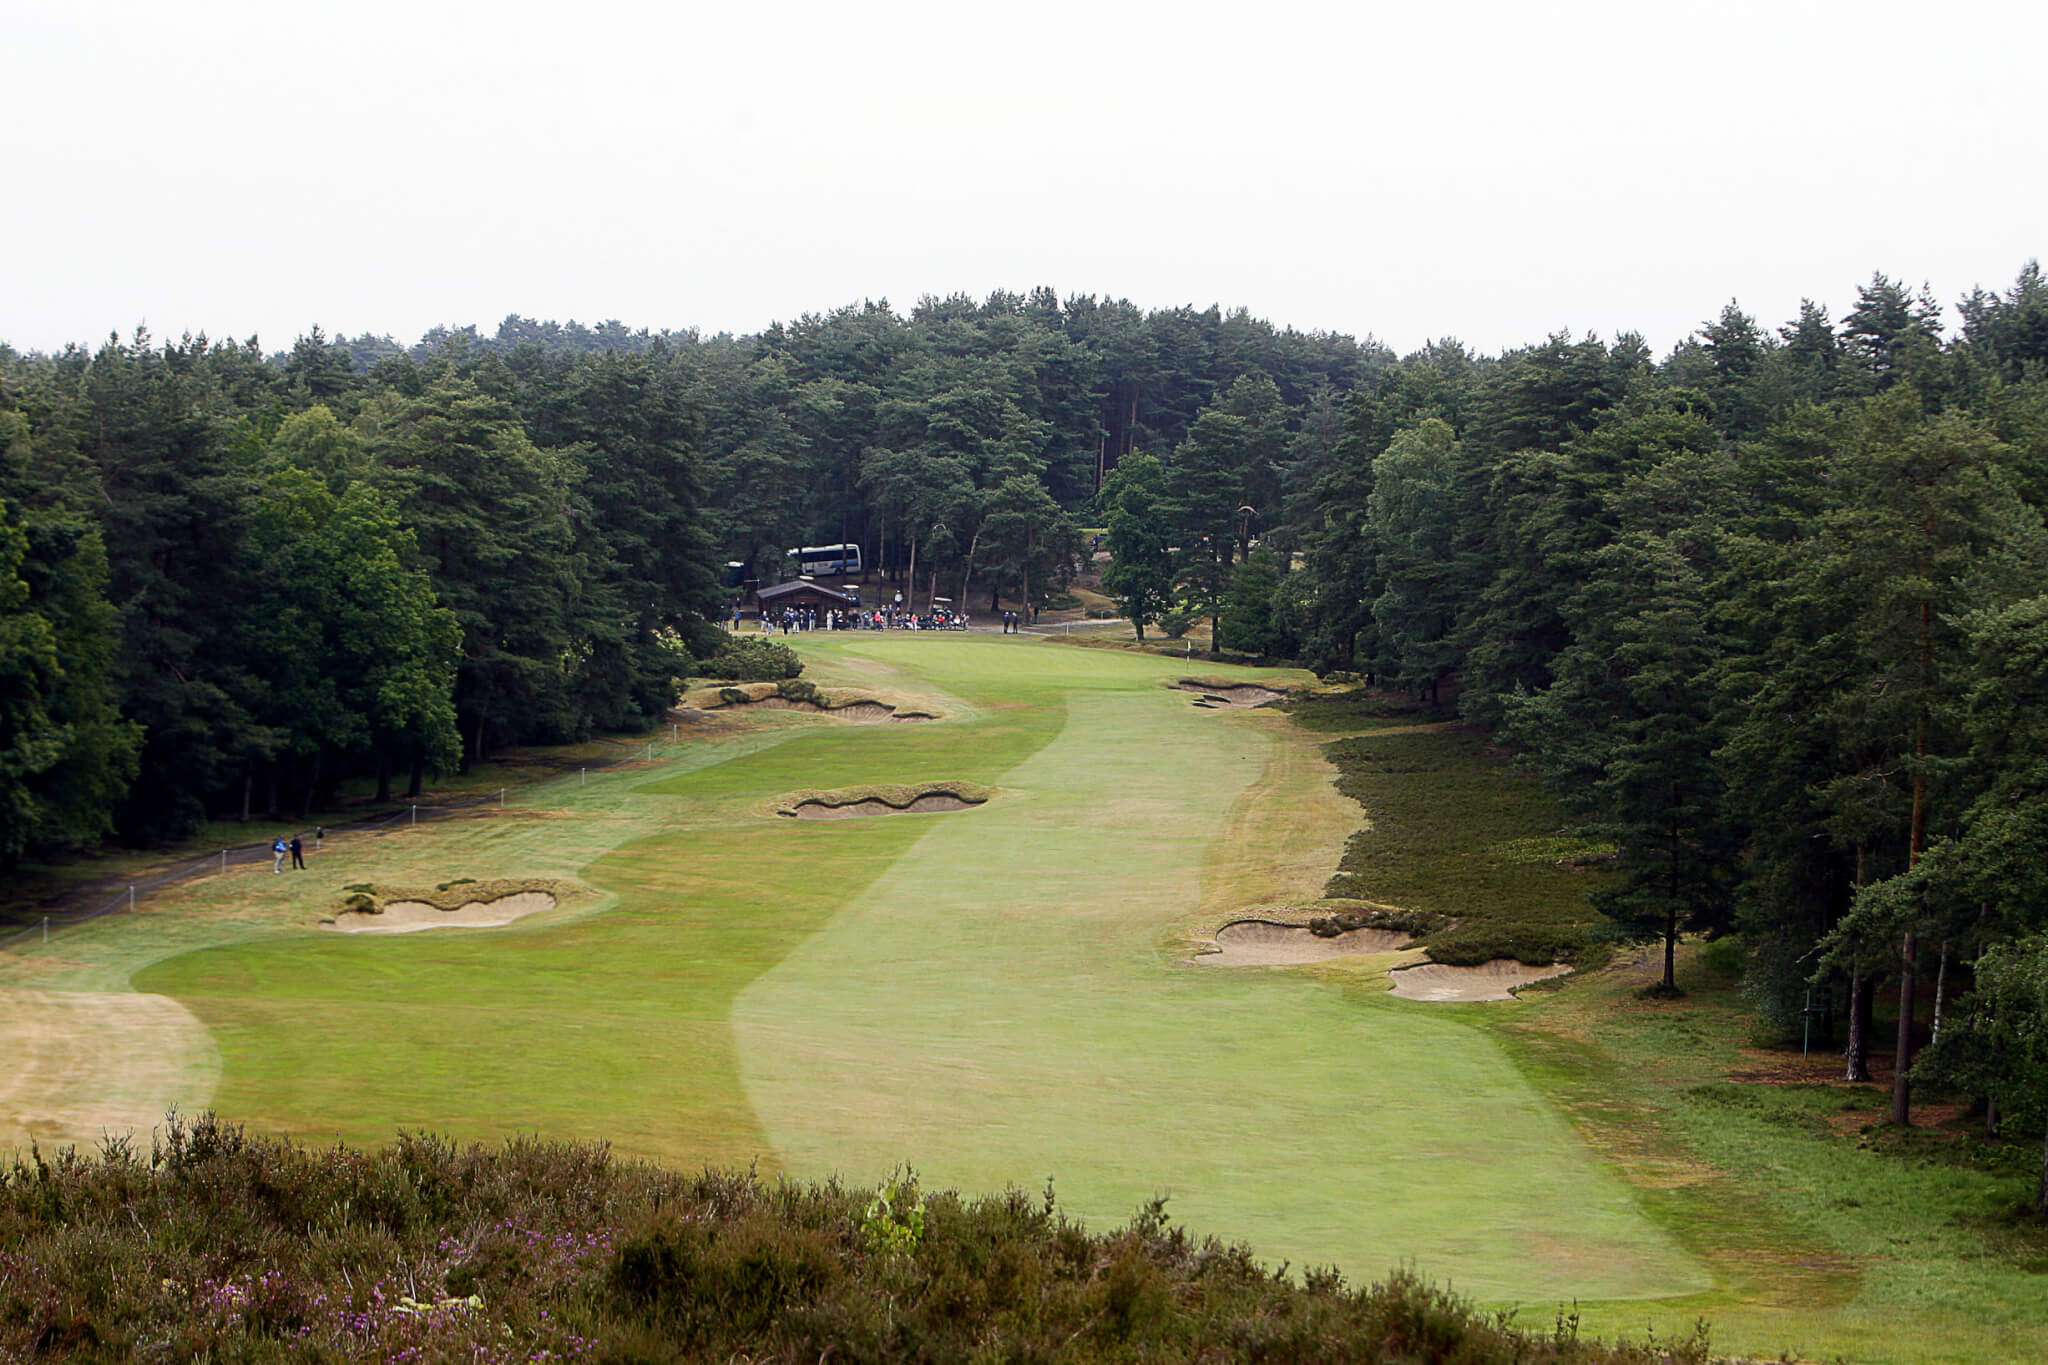 Golf - The Open - International Final Qualifying The View down the 10th hole of the old course at Sunningdale